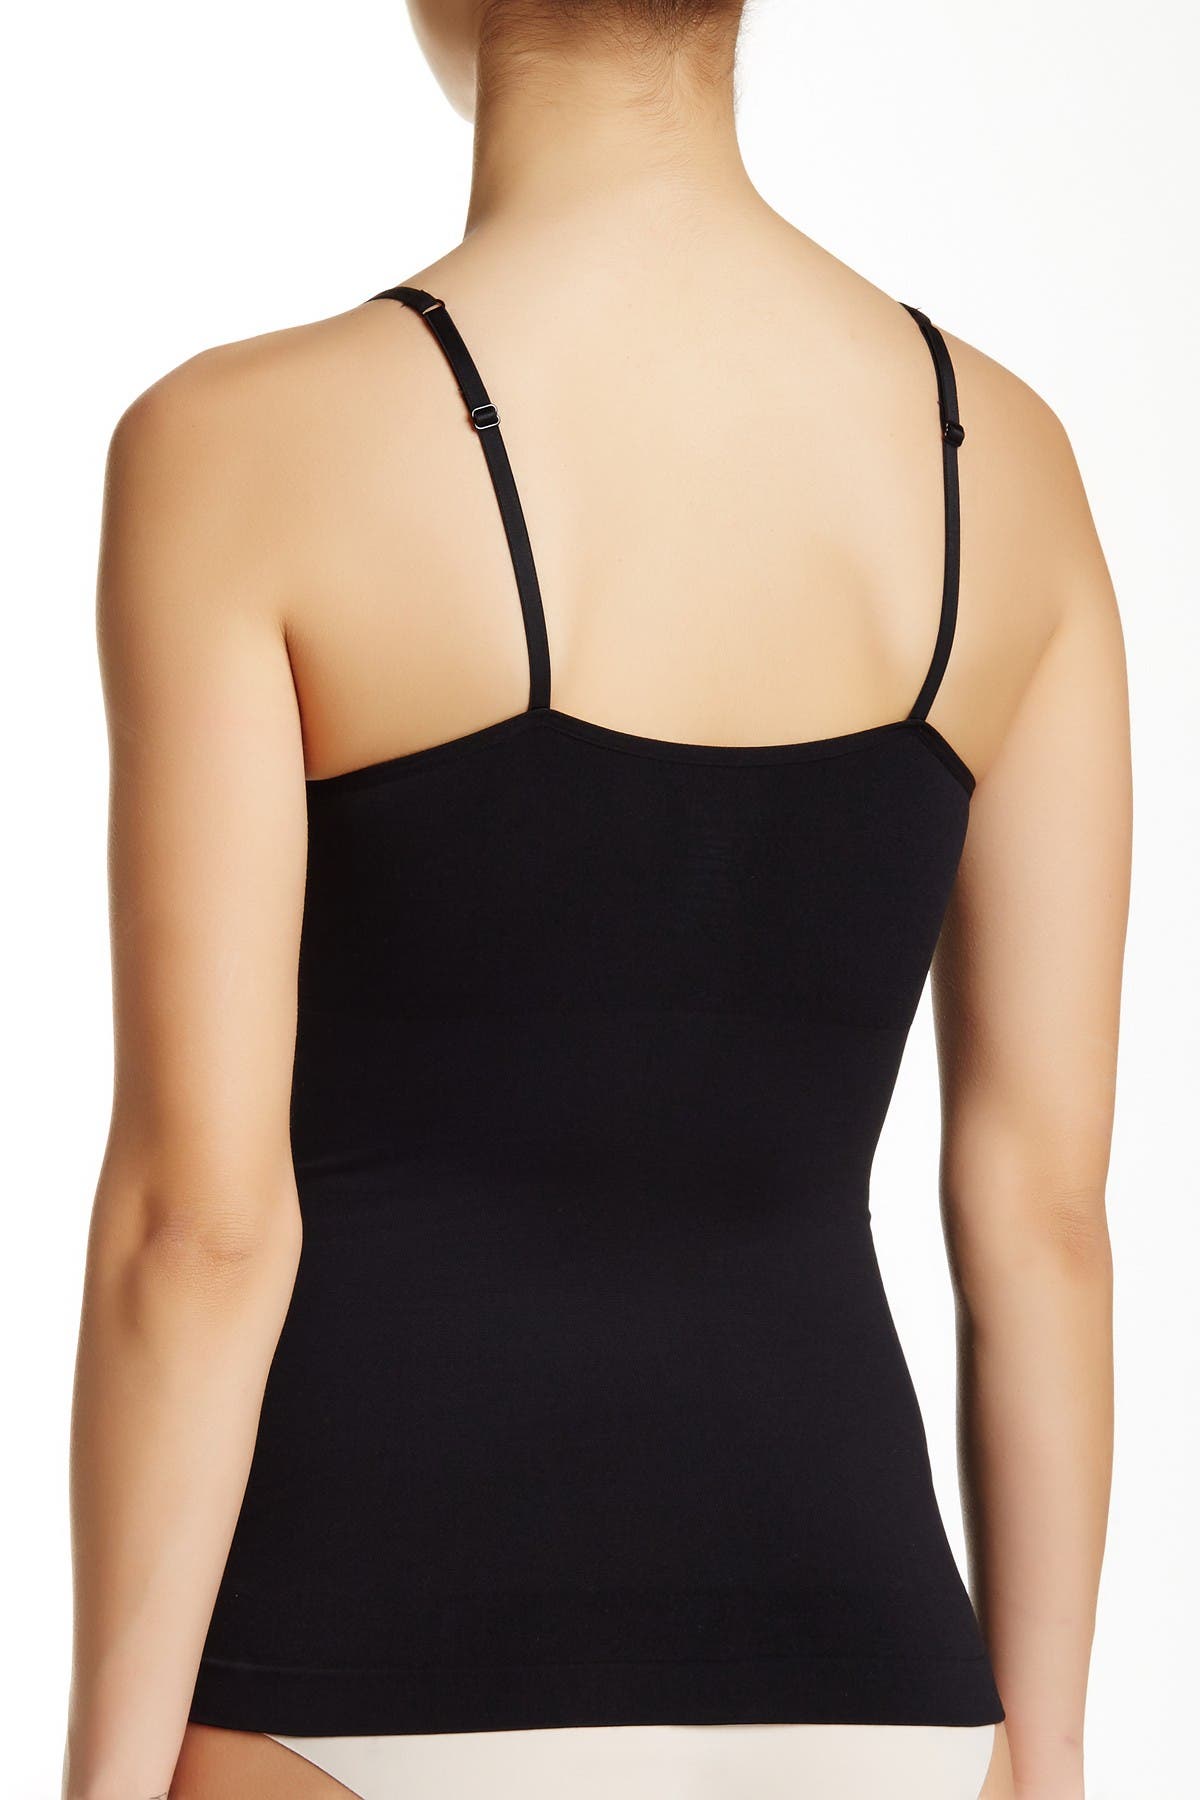 Details about   Yummie BLACK Seamlessly Shaped Convertible Camisole US Large/X-Large 